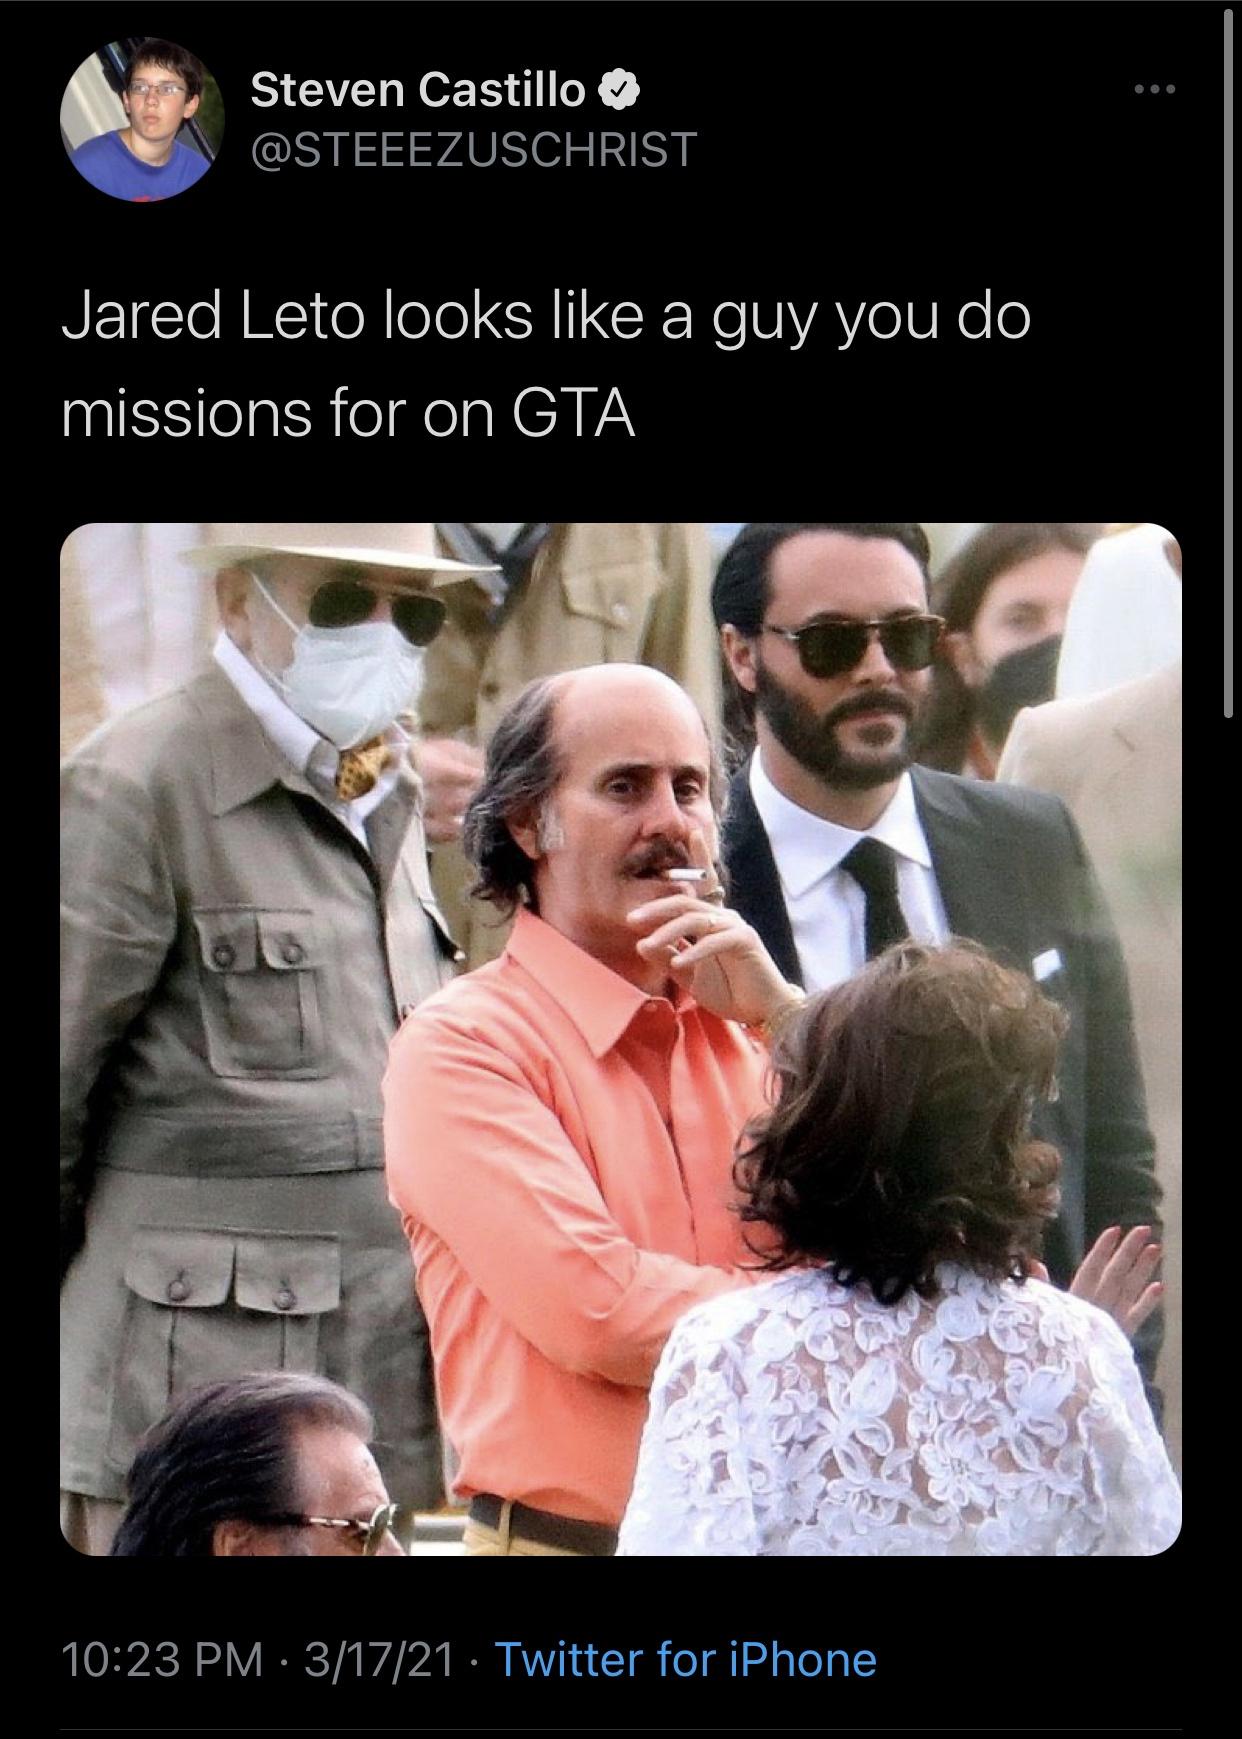 photo caption - Steven Castillo Jared Leto looks a guy you do missions for on Gta 0 31721 Twitter for iPhone